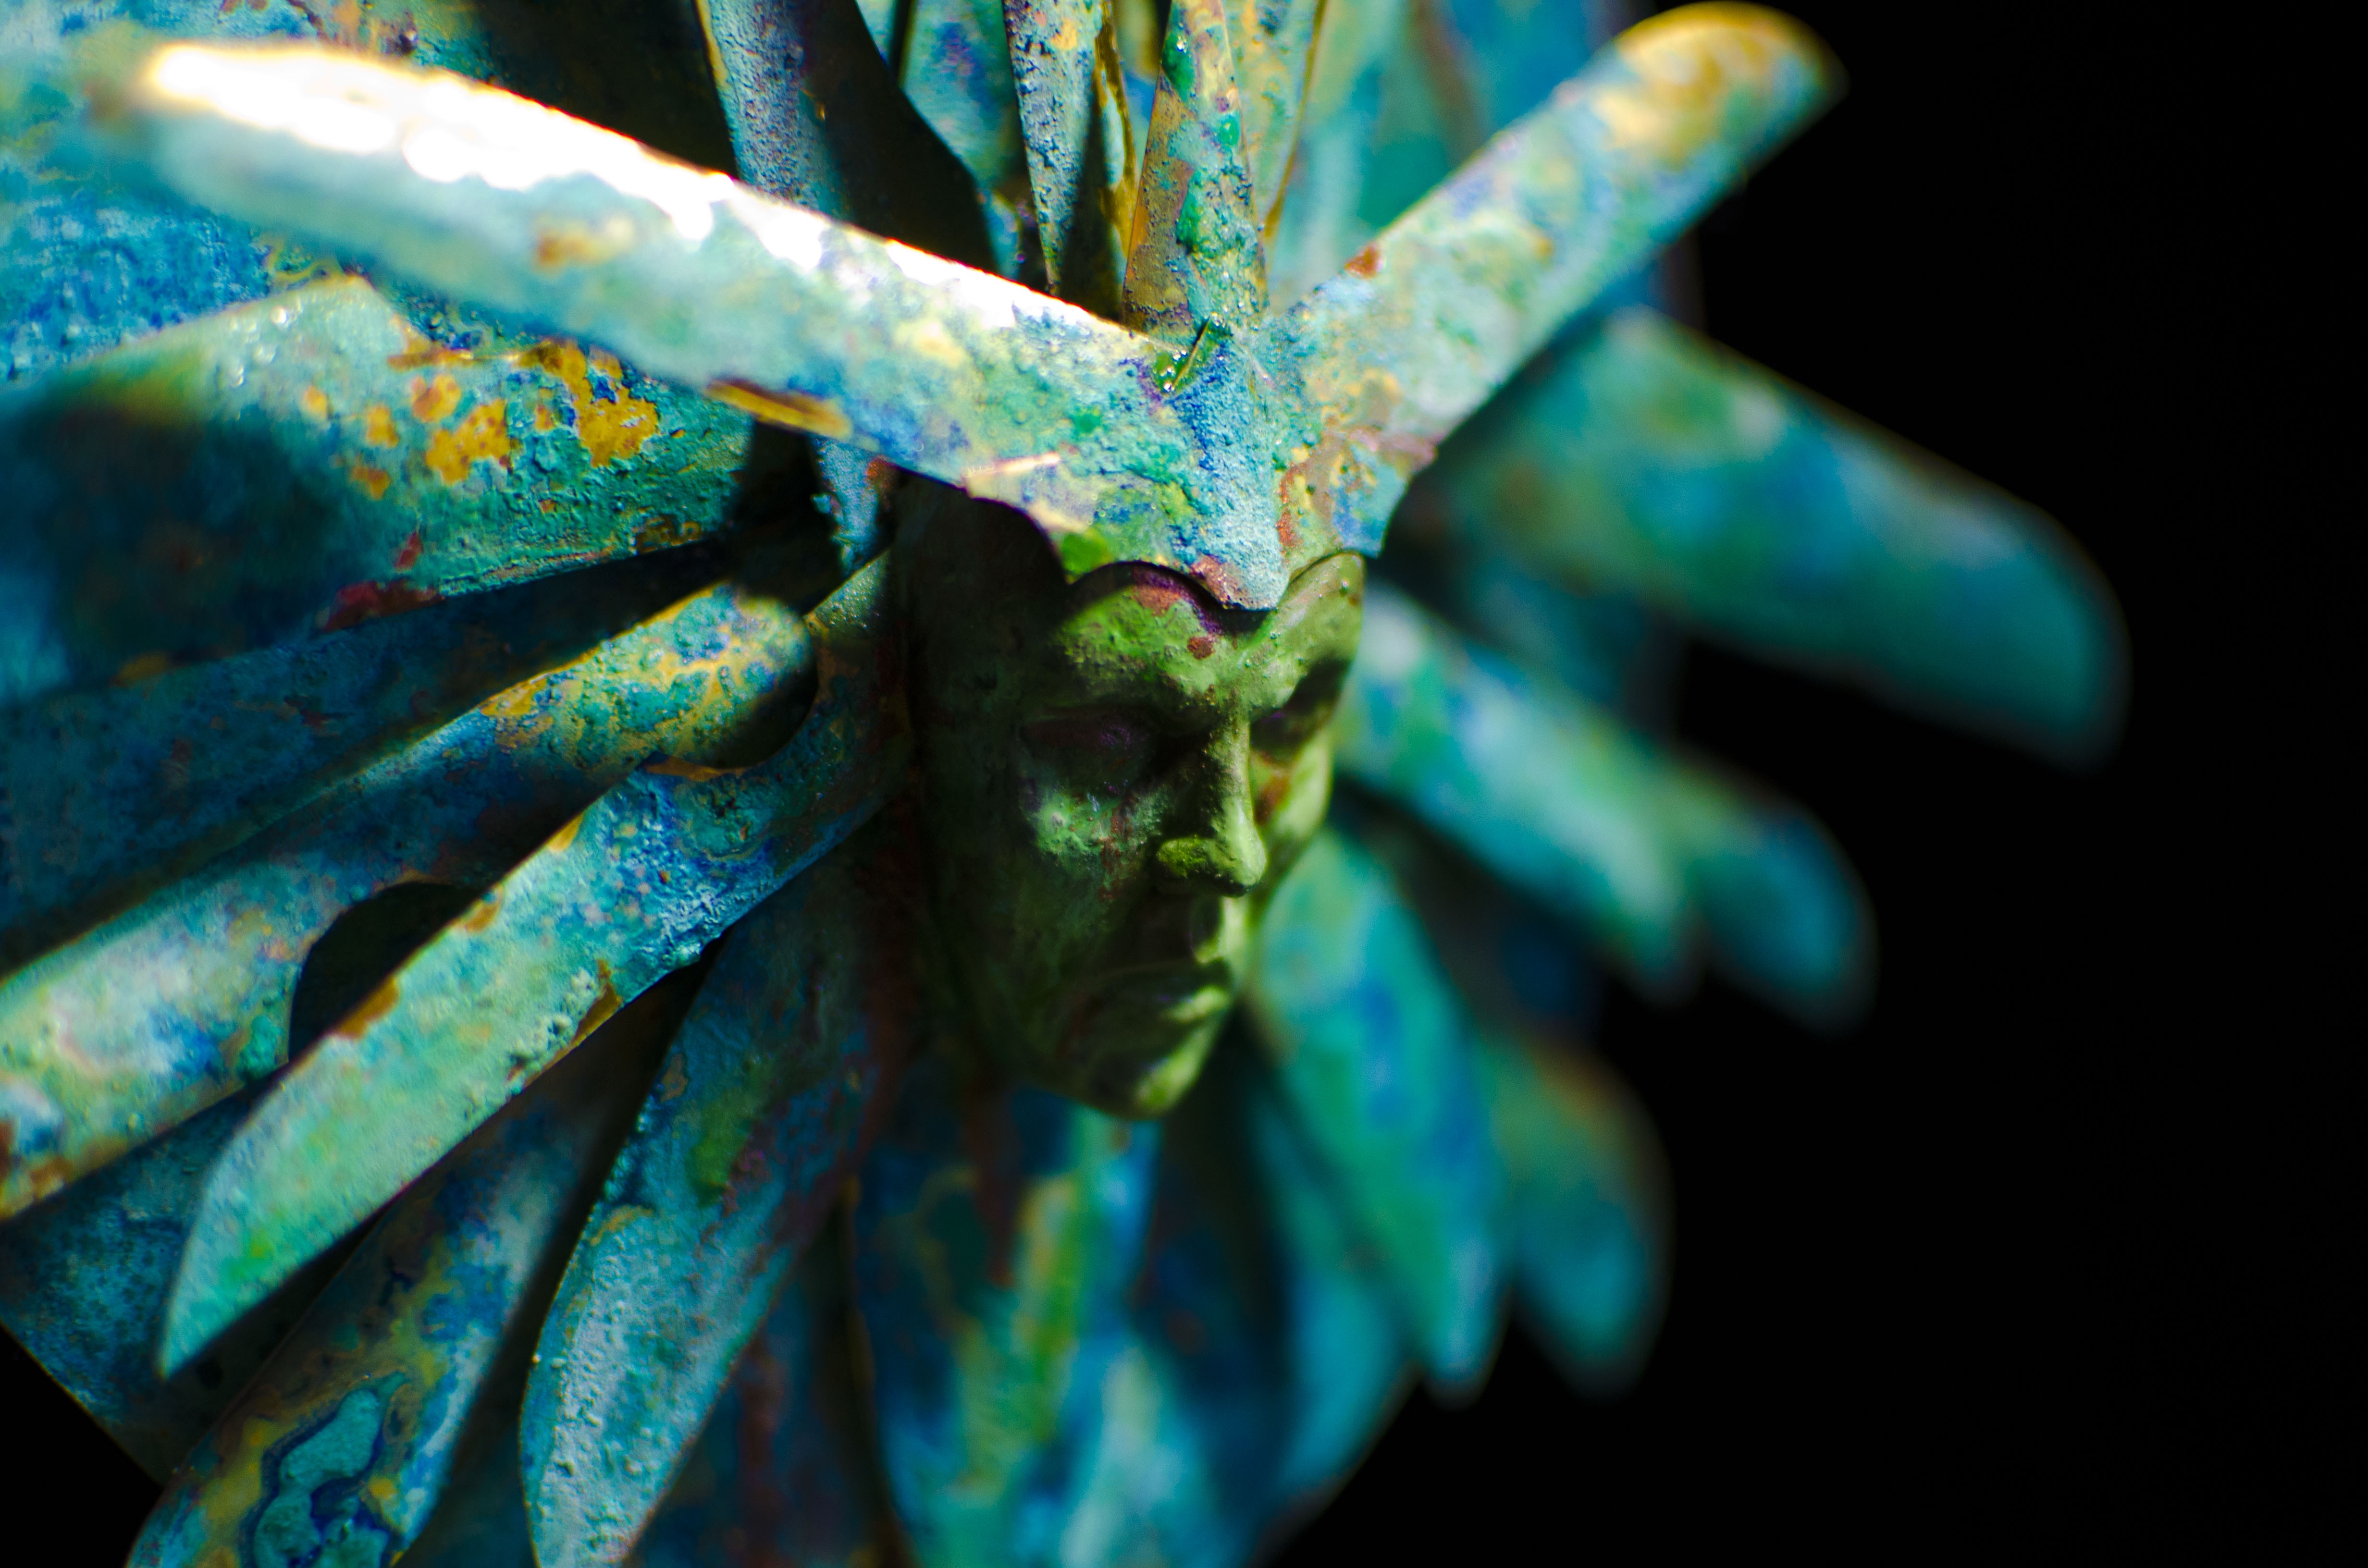 Face Lady Of Pain Planescape Sculpture Cyan Turquoise Green 4928x3264